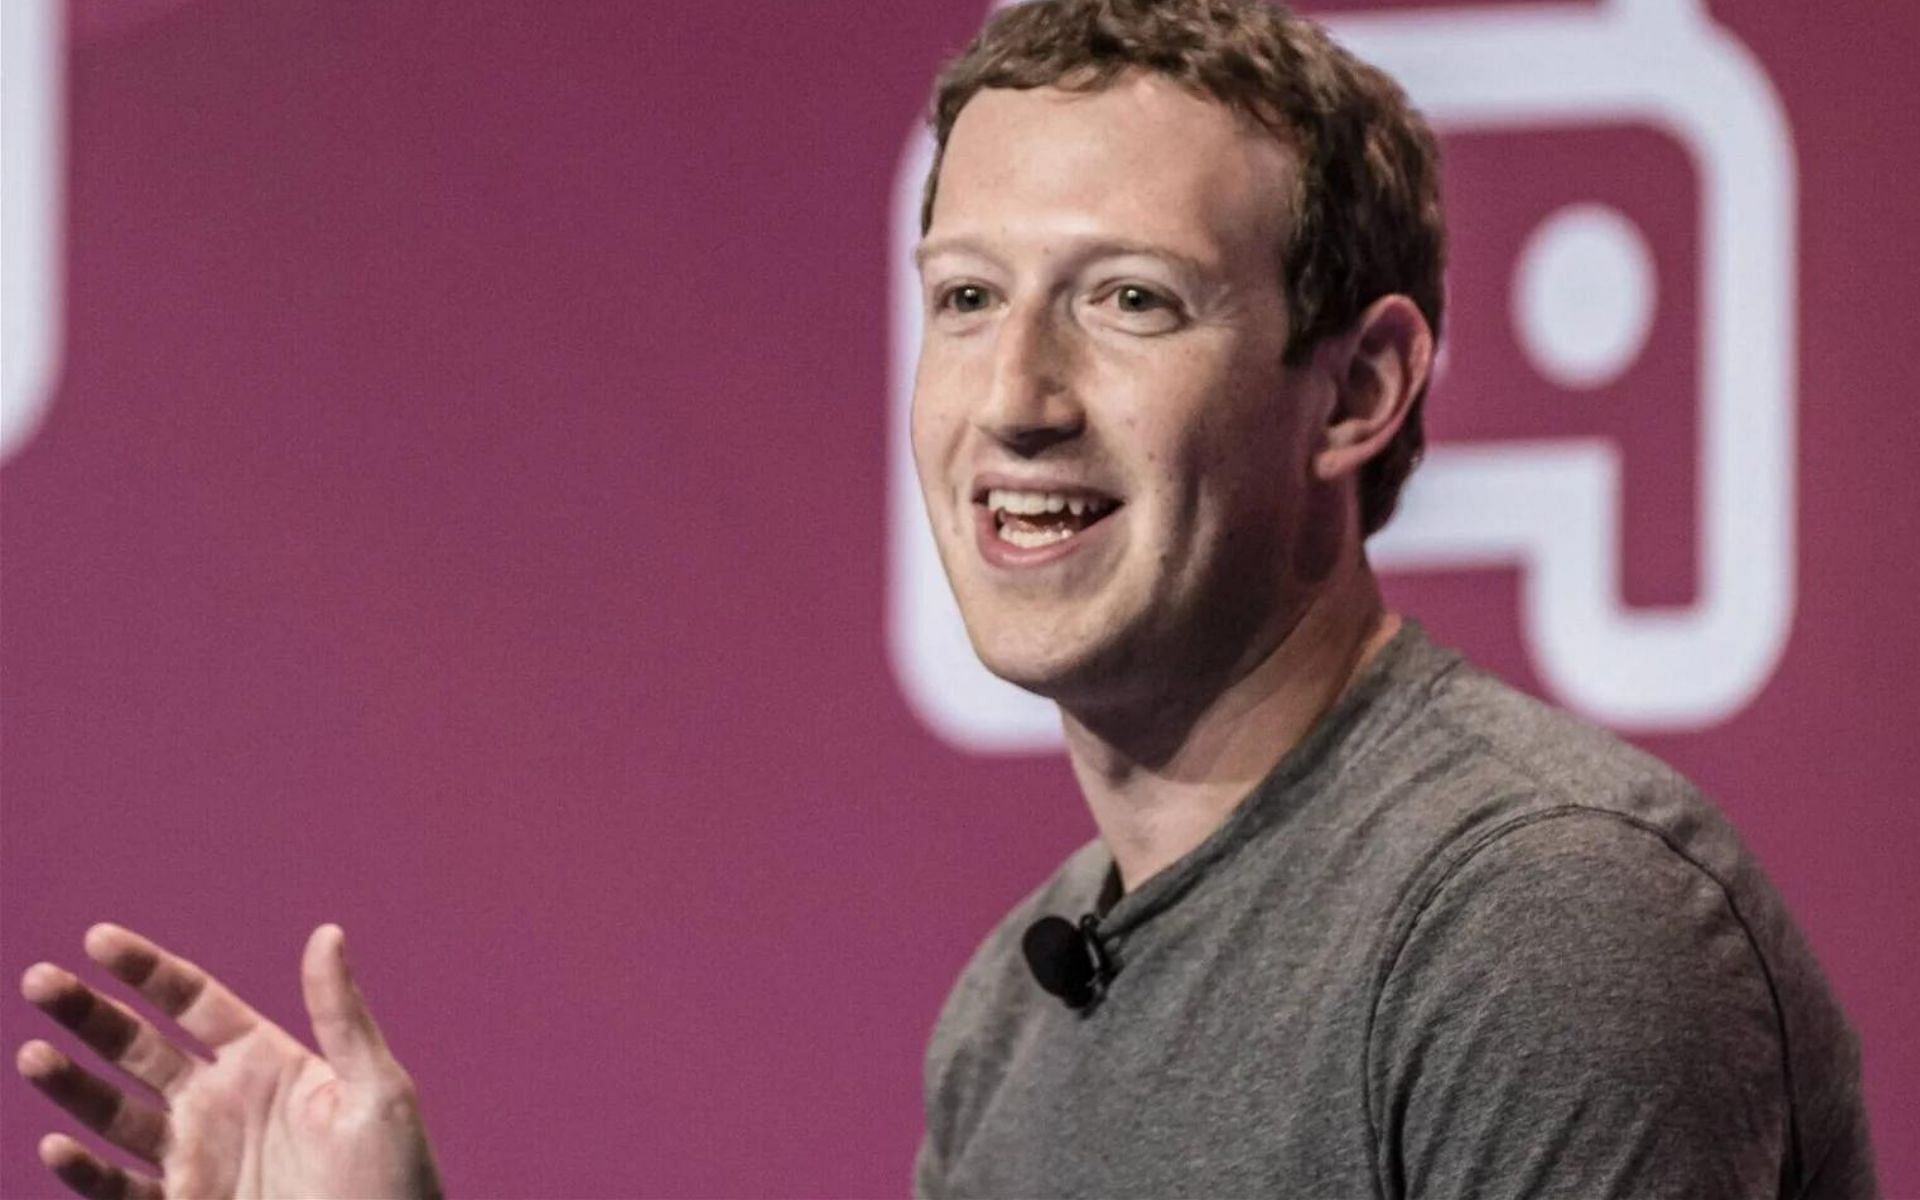 Meta CEO Mark Zuckerberg has competed in BJJ previously